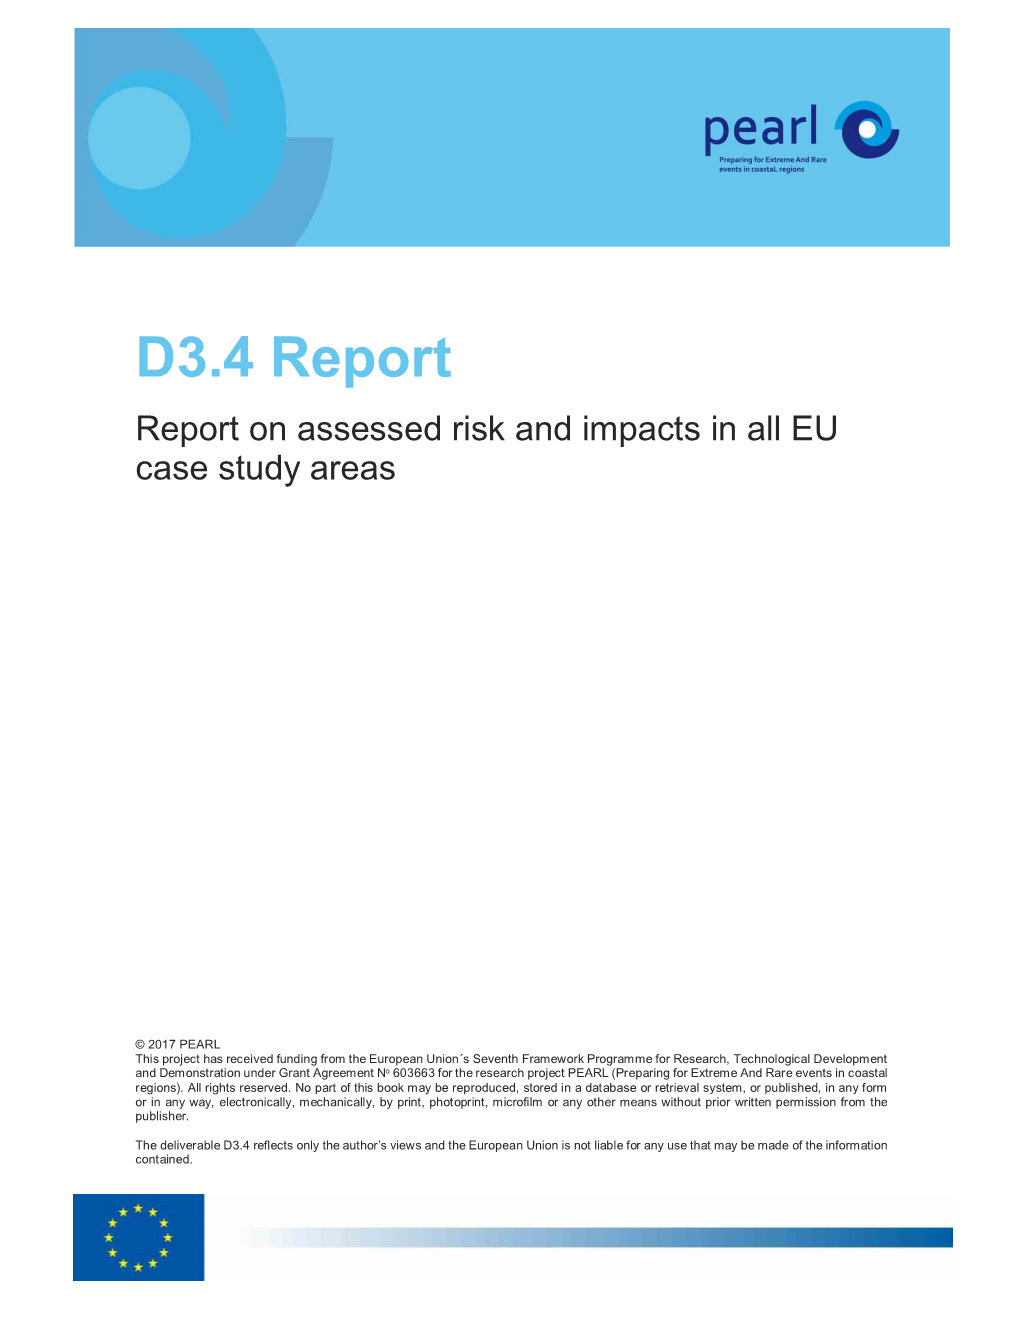 D3.4 Report on Assessed Risk and Impacts in All EU Case